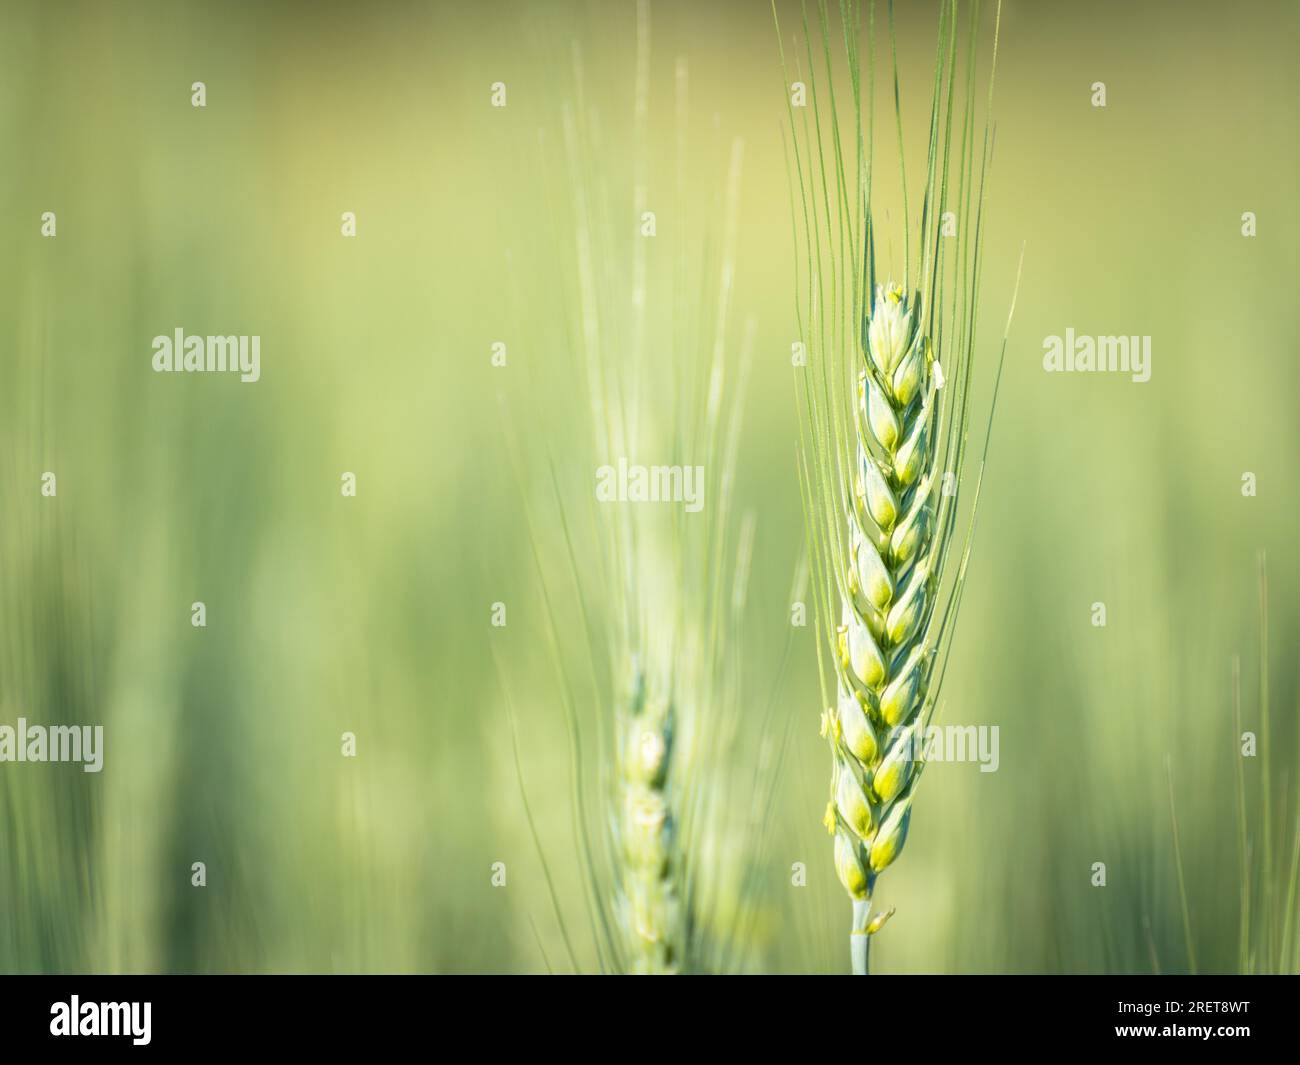 Close-up Of Ripe Golden Wheat With Vintage Effect, Clouds And Sky, Harvest Time Concept Stock Photo